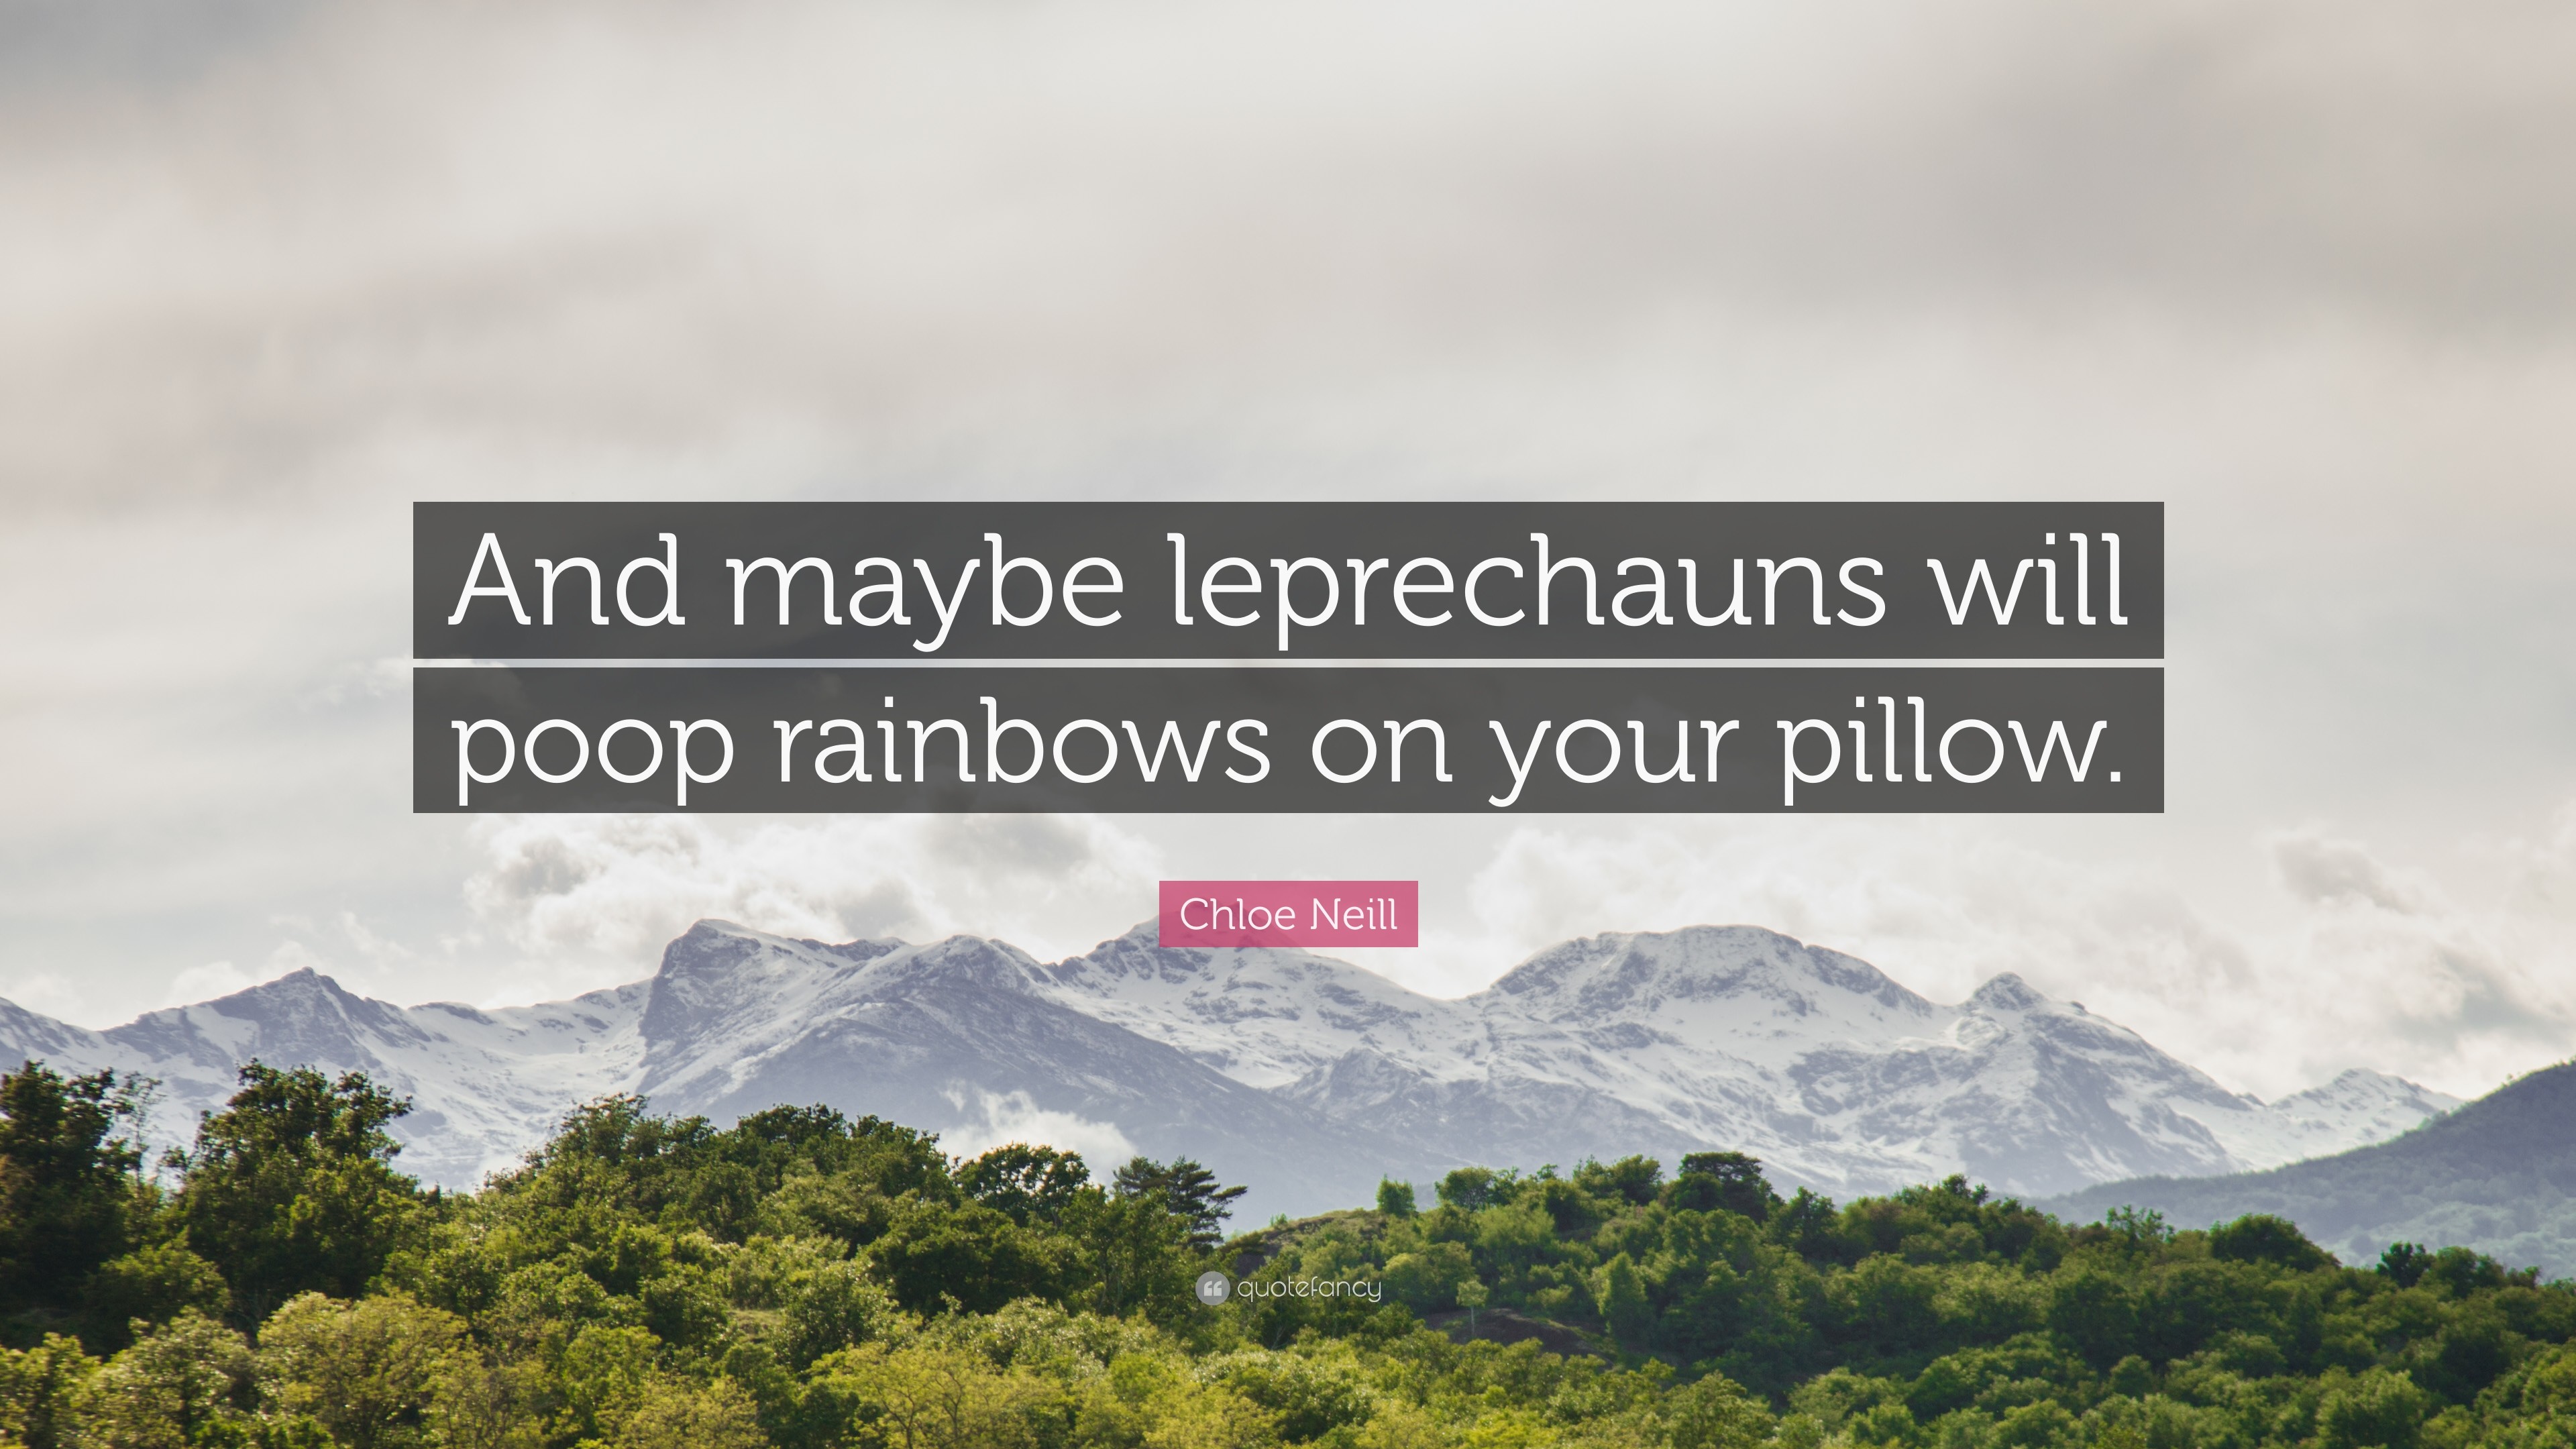 3840x2160 Chloe Neill Quote: “And maybe leprechauns will poop rainbows on your  pillow.”